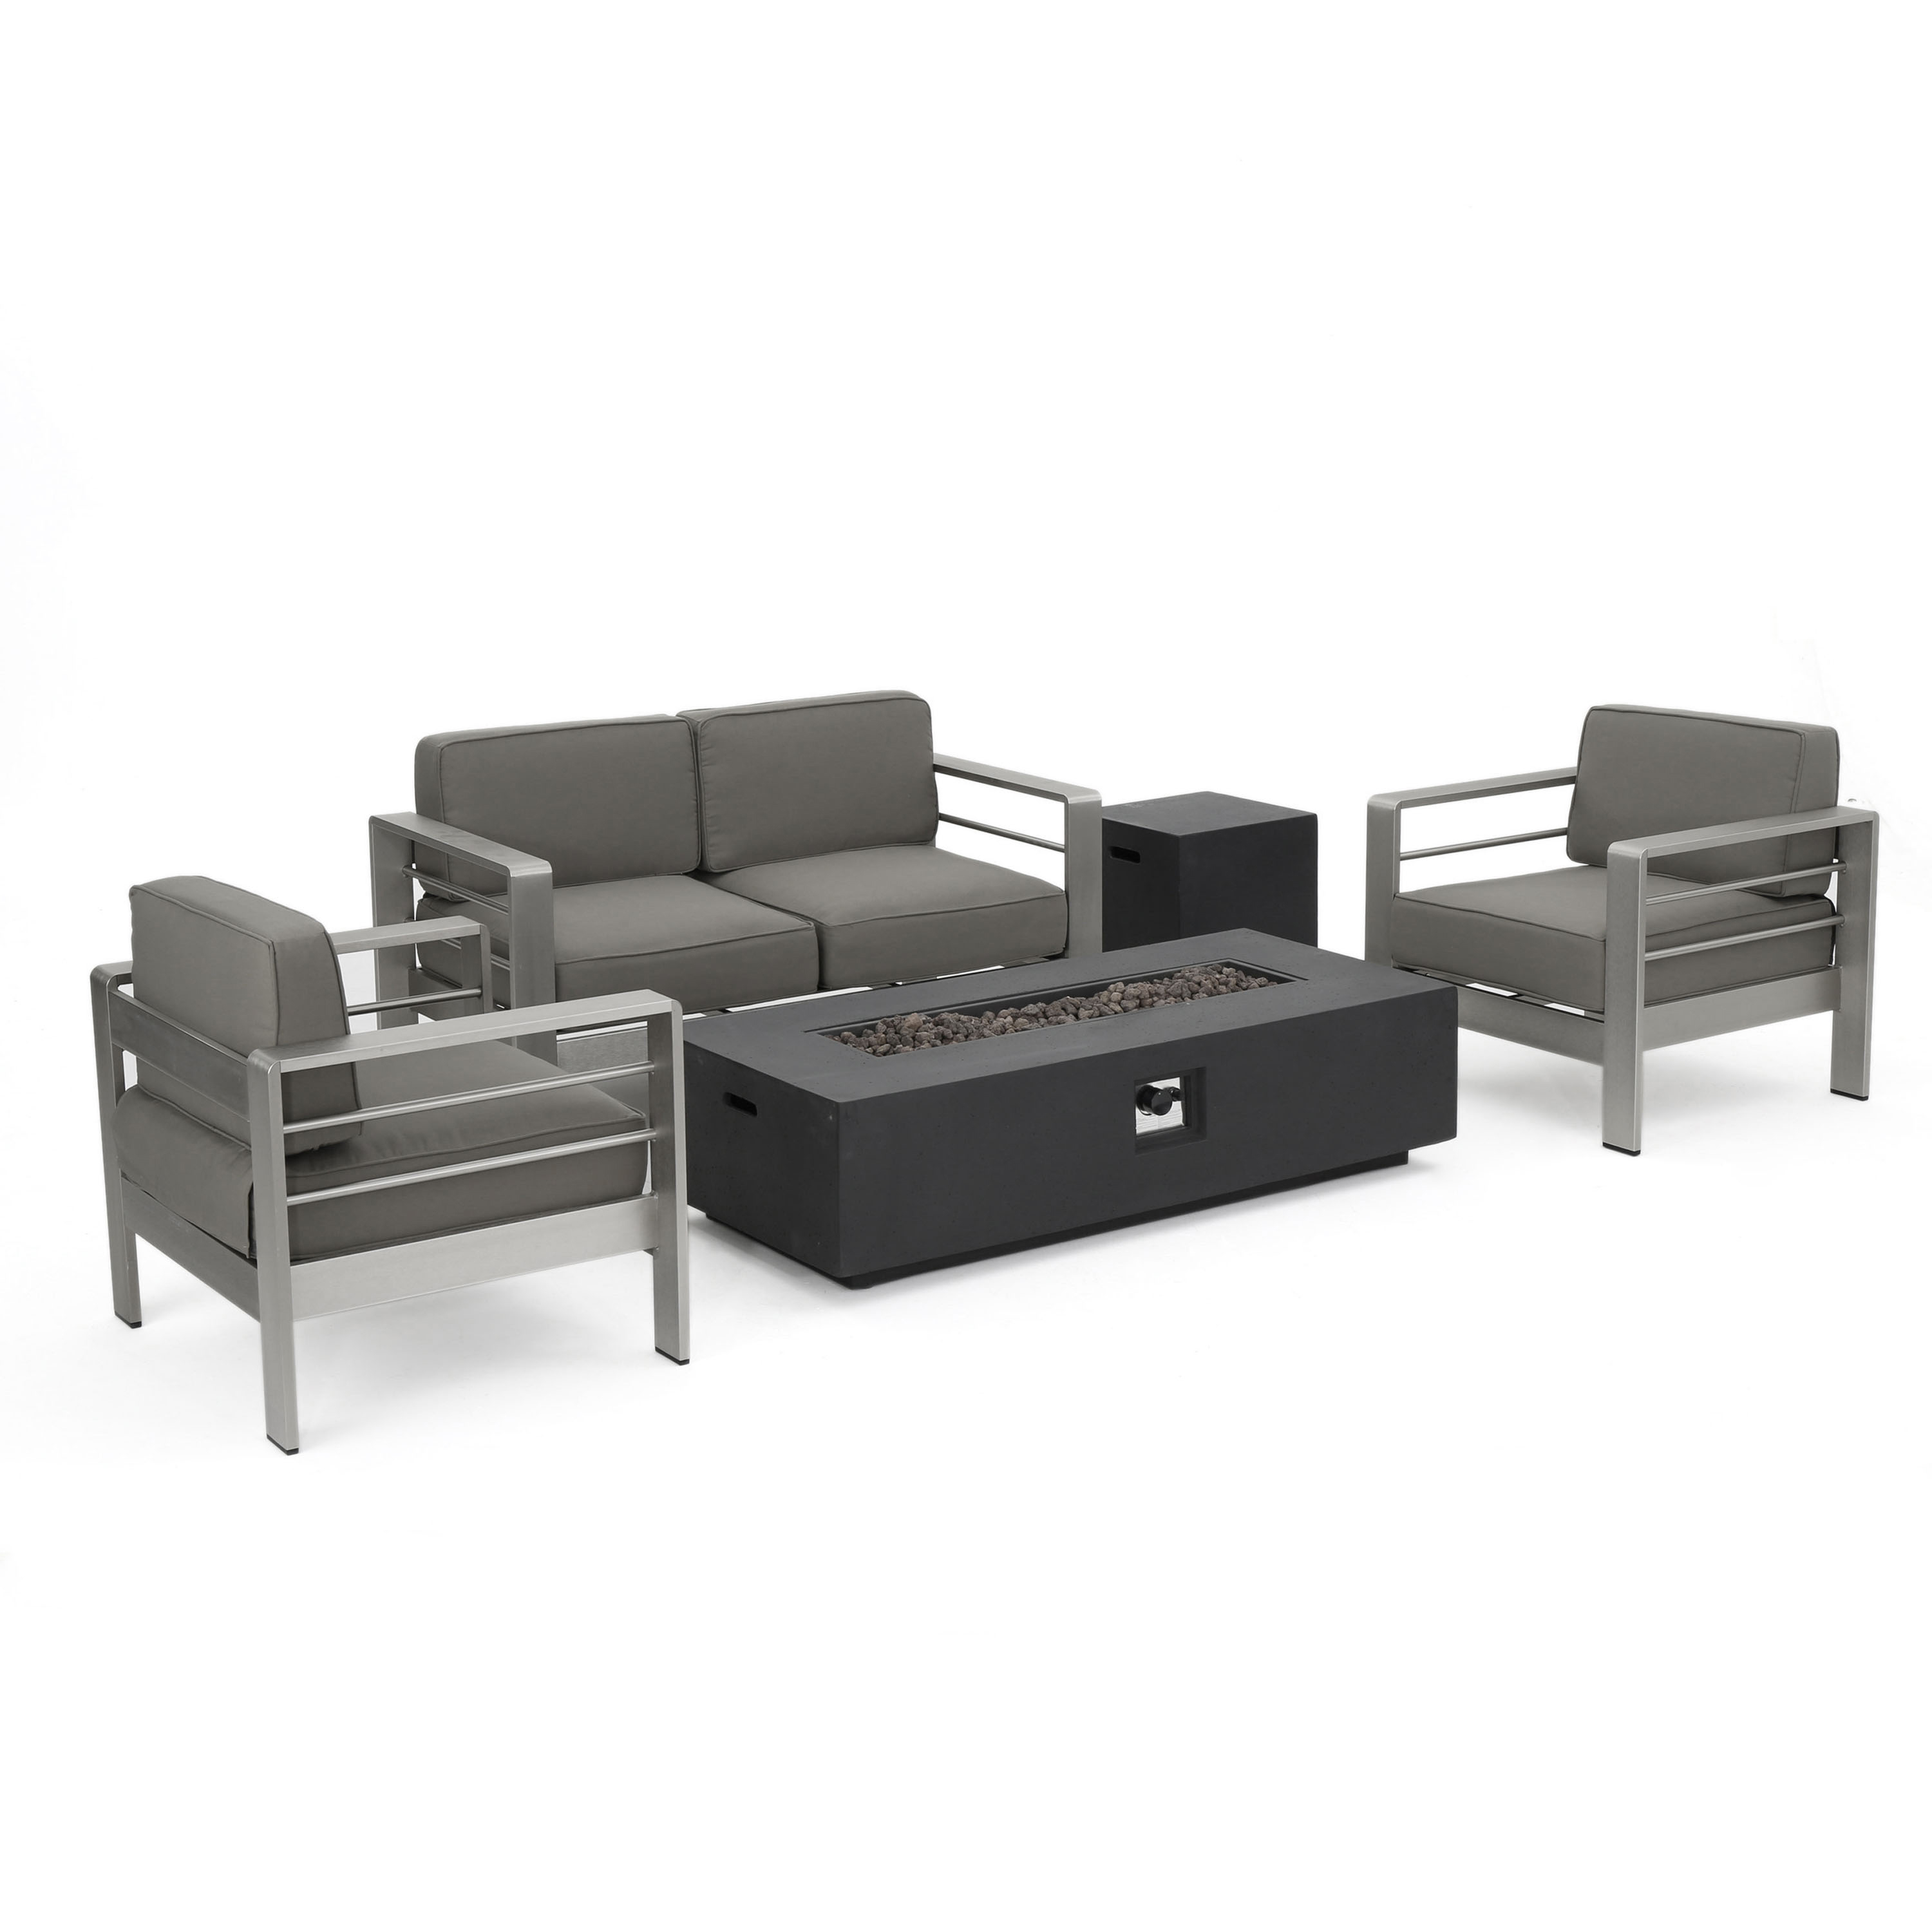 Miller Outdoor Sofa and Chat Sets with a Glass Top Dining Set, Lounges, and a Grey Firepit, Khaki, Silver - image 4 of 11